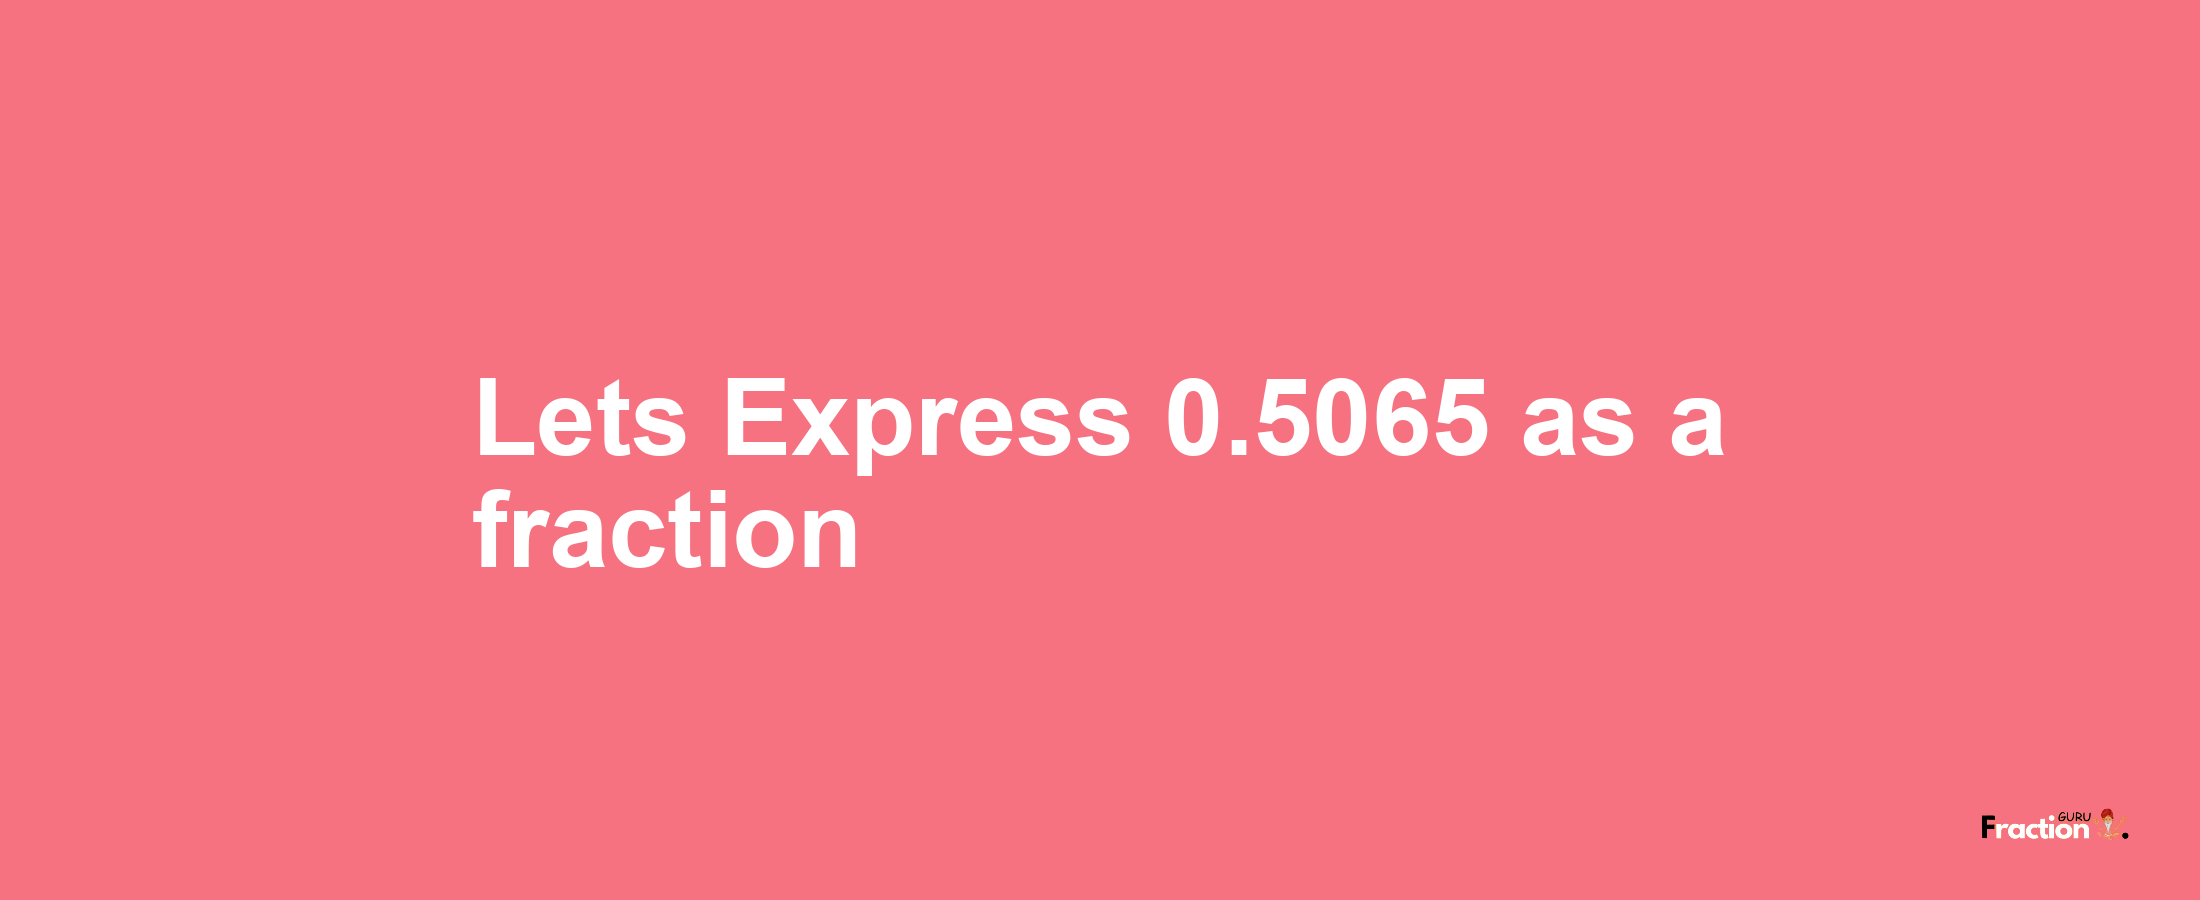 Lets Express 0.5065 as afraction